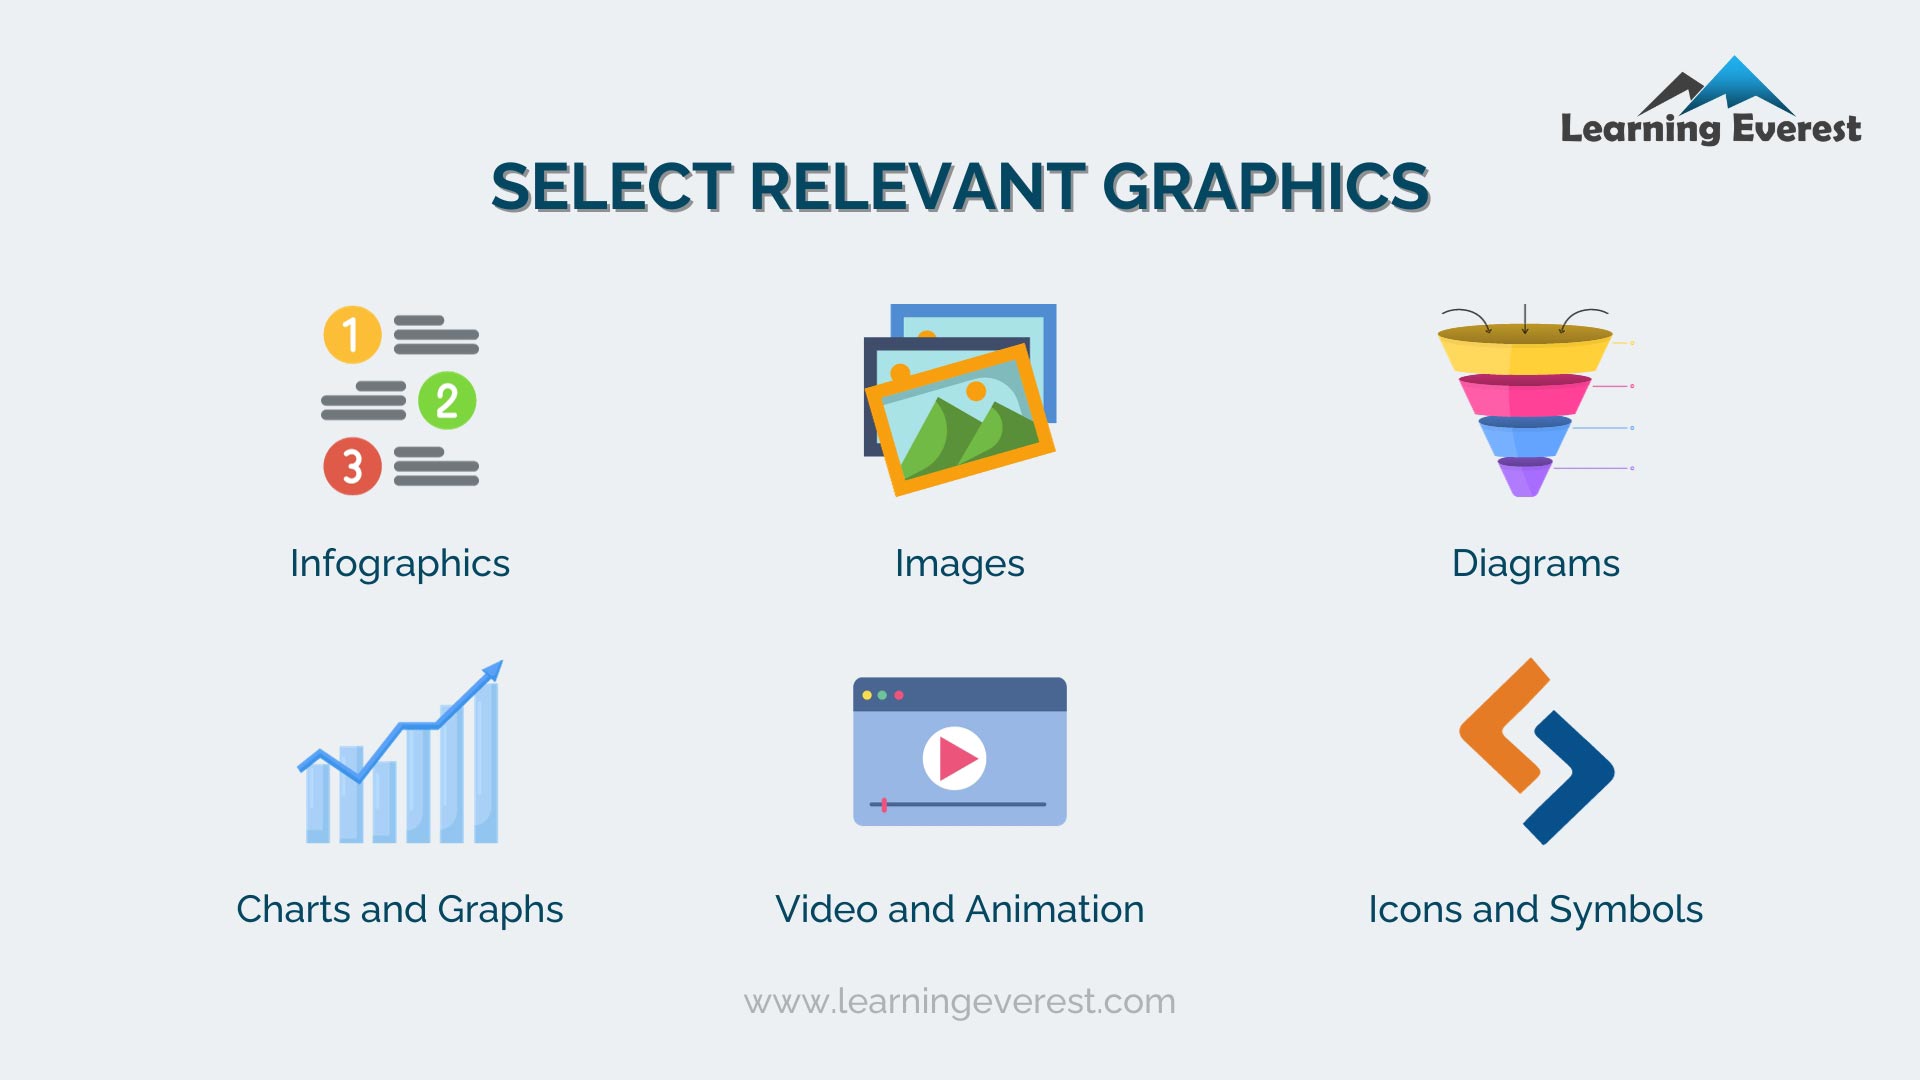 Tips for Interactive Sales and Marketing Training Content - Use graphics